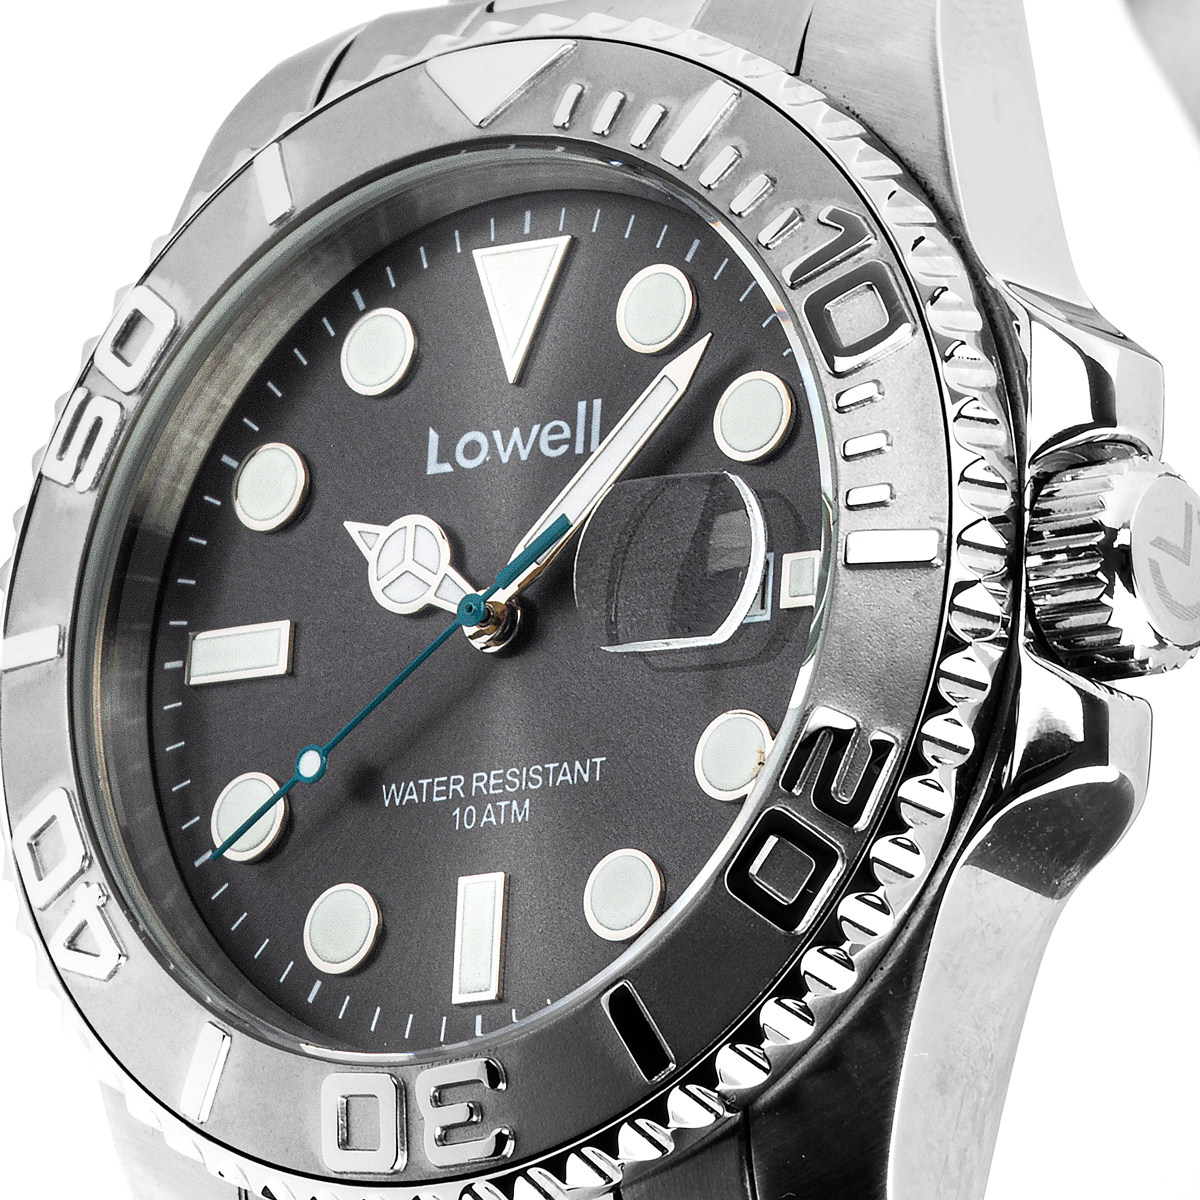 Orologio Juventus Stile Rolex By Lowell